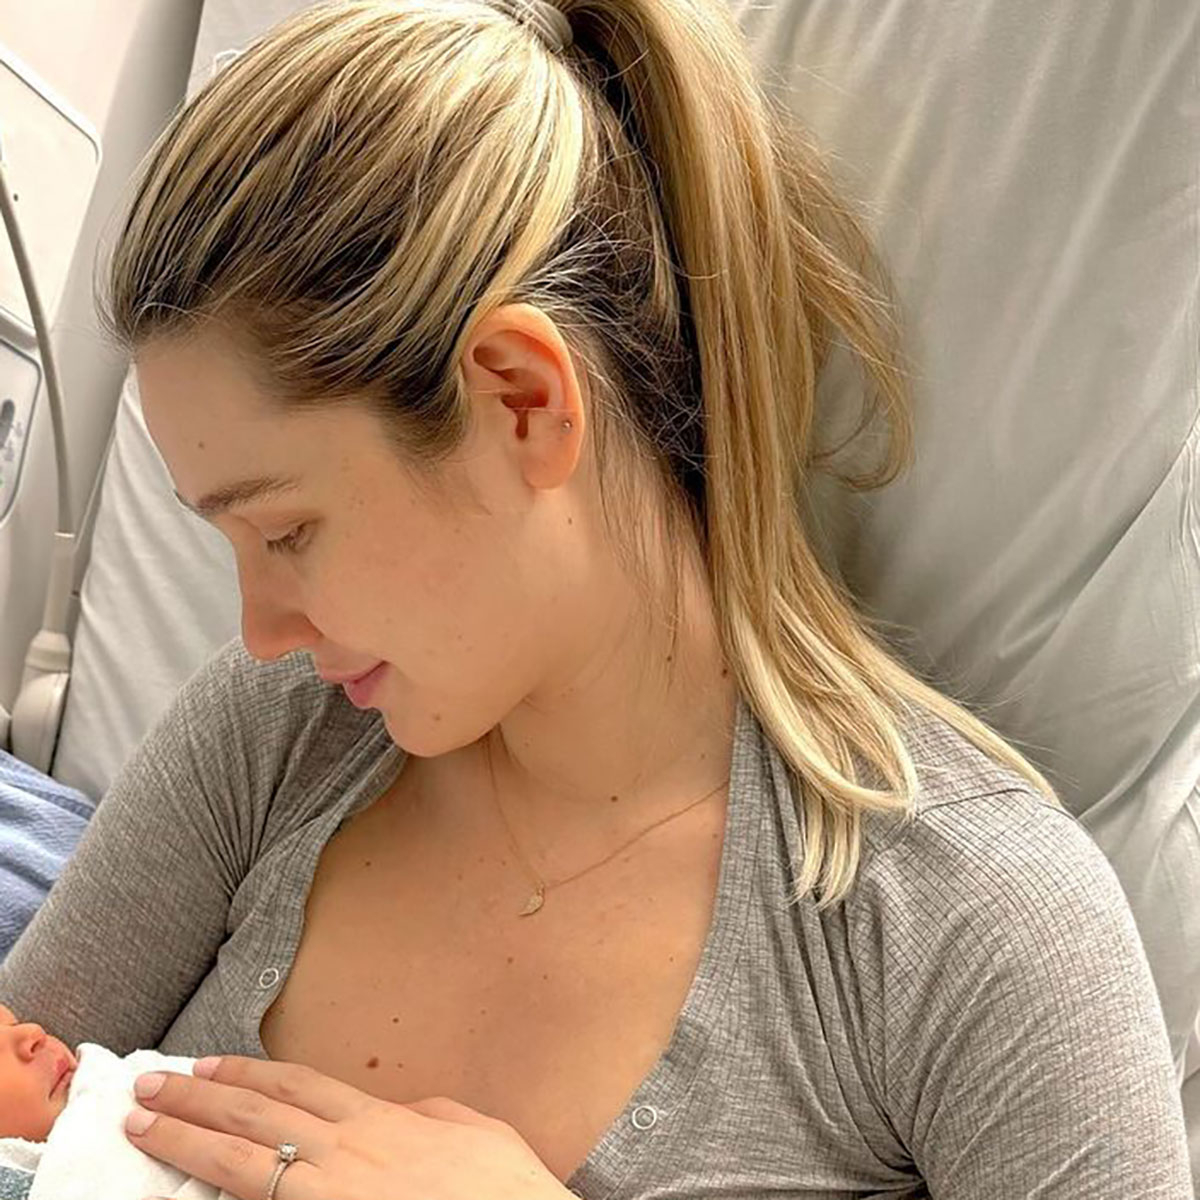 Siesta Key's Madisson Hausburg Welcomes Baby 2 Years After Son's Death